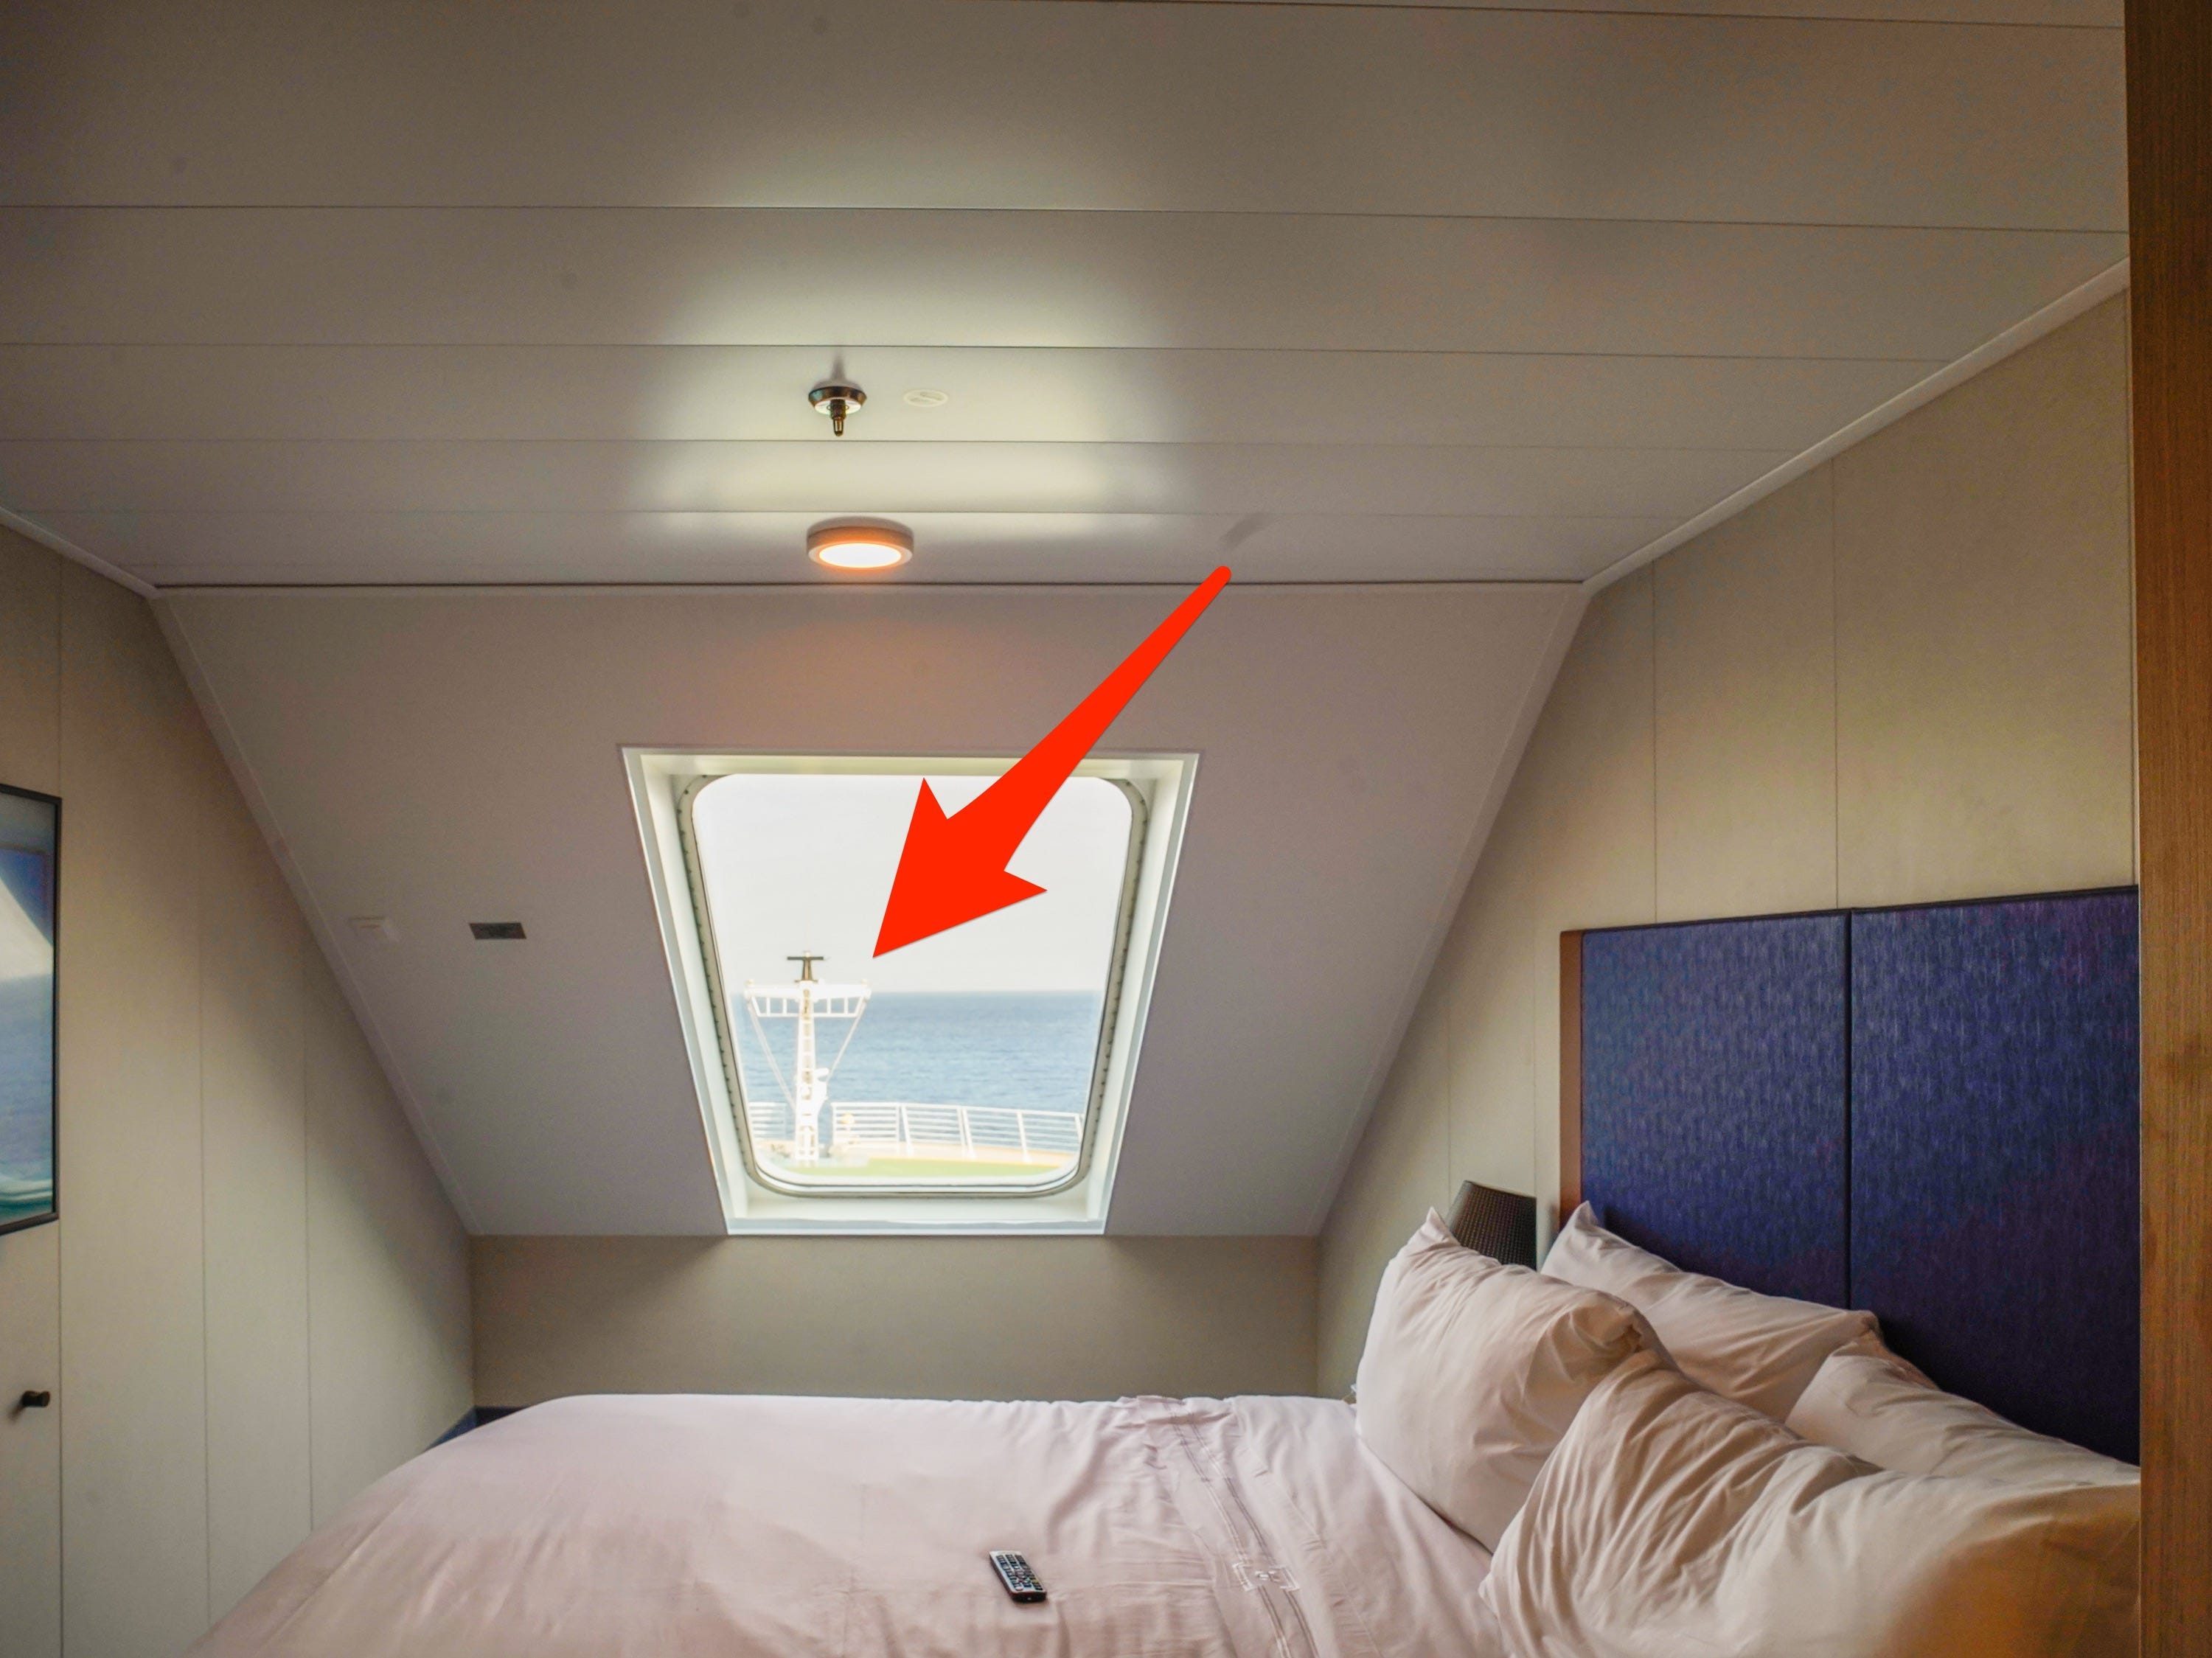 <p>For $2,000, I slept in a 179-square-foot <a href="https://www.businessinsider.com/royal-caribbean-wonder-of-seas-cruise-cabin-photos-2022-4">stateroom</a> on deck eight. My cabin had a private bathroom, a king-size bed, and an ocean view.</p><p>It was a mid-tier room — a step above <a href="https://www.businessinsider.com/carnival-cruises-interior-room-royal-caribbean-ocean-view-cabin-photos-2022-10">interior staterooms</a> with no window, a step below staterooms with a balcony, and two steps below a suite. I quickly realized this was the <a href="https://www.businessinsider.com/why-you-shouldnt-book-room-at-front-of-cruise-ship-2023-7">wrong room</a> to book.</p><p>Since it was at the very front of deck eight, I felt constant motion in my room. This made sense to me after talking to <a href="https://www.businessinsider.com/cruise-tips-first-timers-from-seasoned-cruisers-2022-5">seasoned cruisers</a> on the ship, several of whom told me that the front of the ship was one of the worst places to be for feeling motion. They said that higher decks in the middle of the ship feel calmer and more stable.</p><p>Some nights were rockier than others. On the roughest nights, I heard and felt a similar sensation to thunder beneath me every few minutes. Loud thumps and heavy vibrations in my room sounded like large pieces of furniture falling down. The first night this happened, I feared the worst, but over time, I realized that this was a normal aspect of cruising — but one I would likely never get used to.</p><p>Next time, I'd choose a room in the middle of the ship.</p>